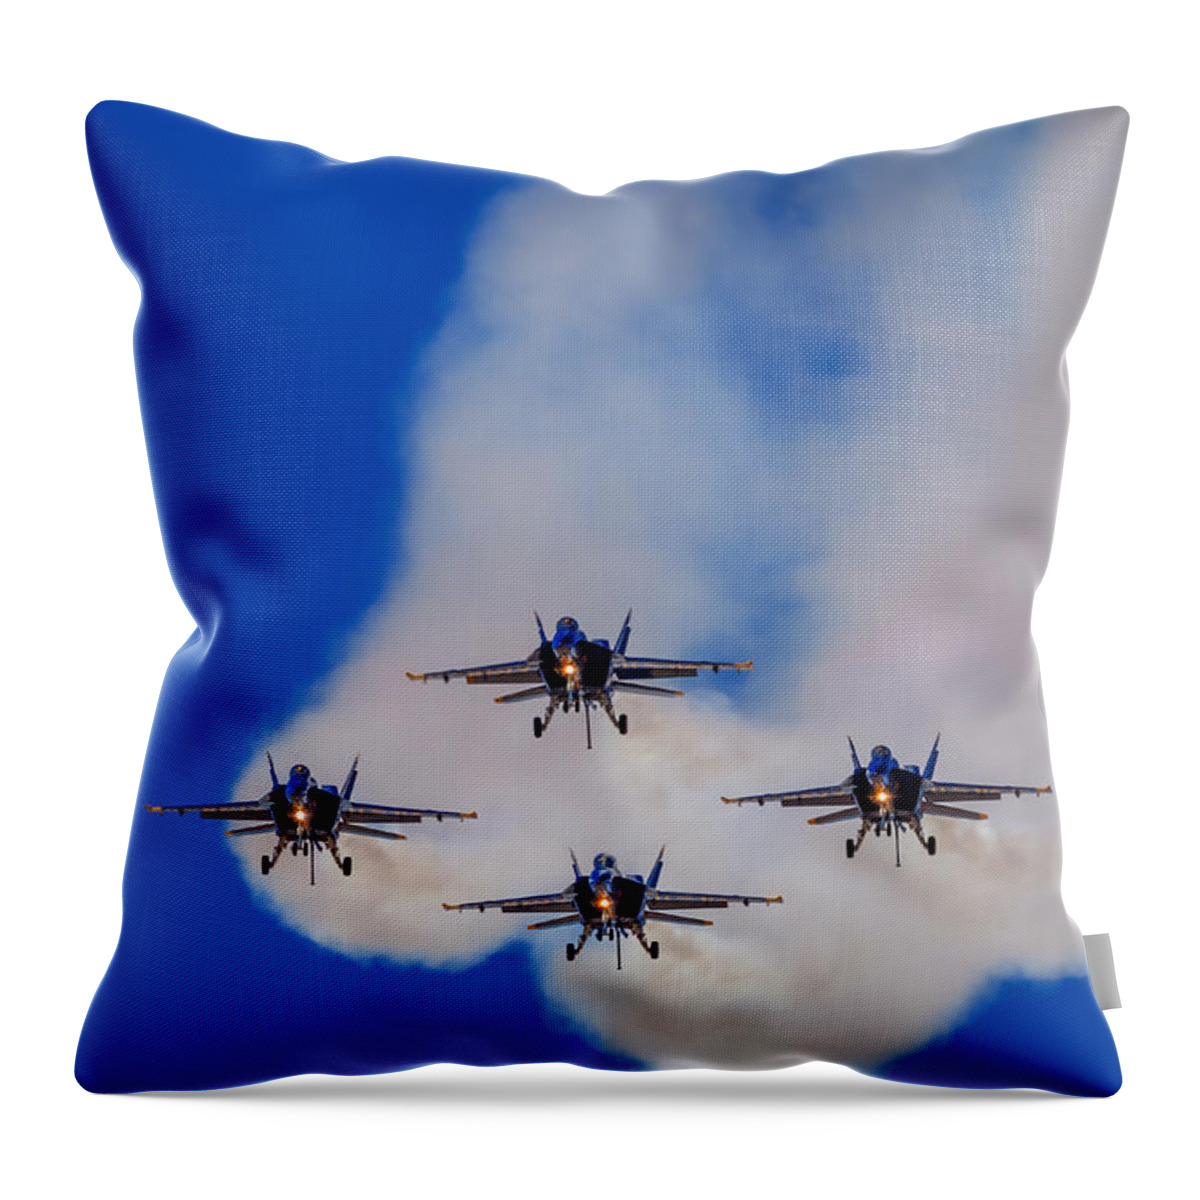 Top Gun Throw Pillow featuring the photograph The Blue Angels - U.S. Navy Flight Demonstration Squadron by Sam Antonio